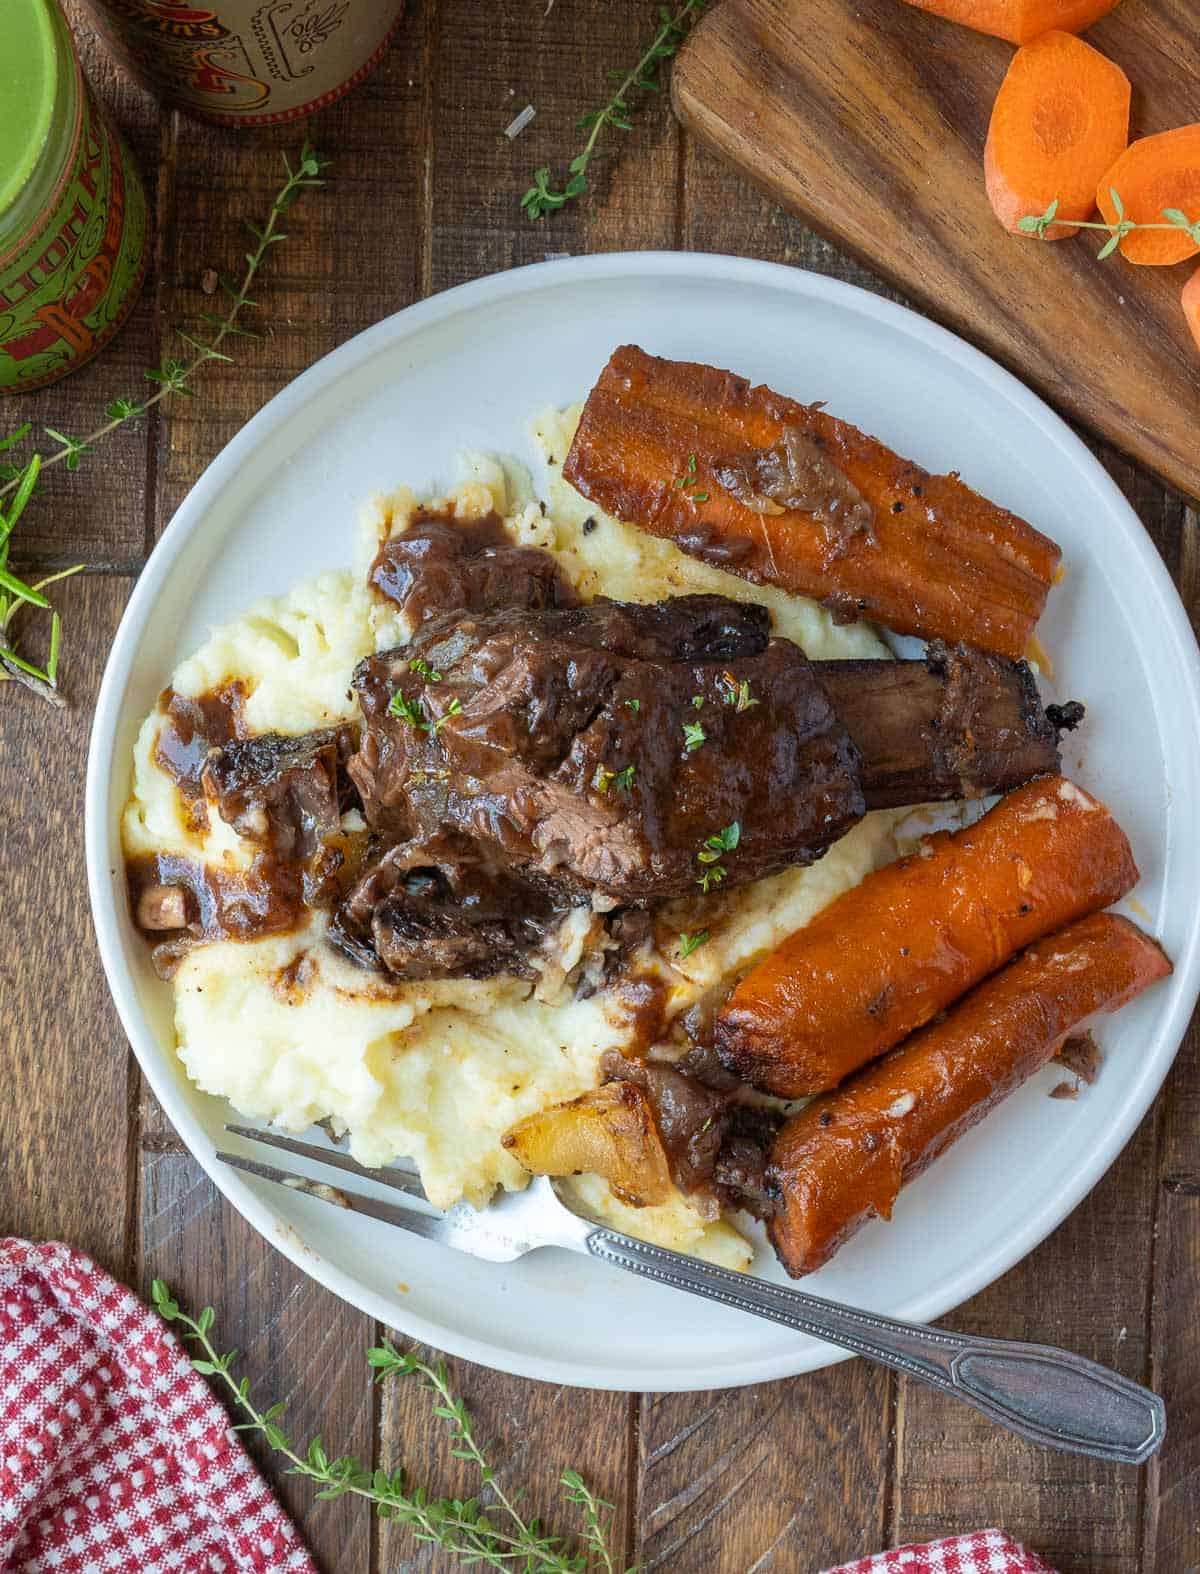 Short ribs on mashed potatoes with carrots.